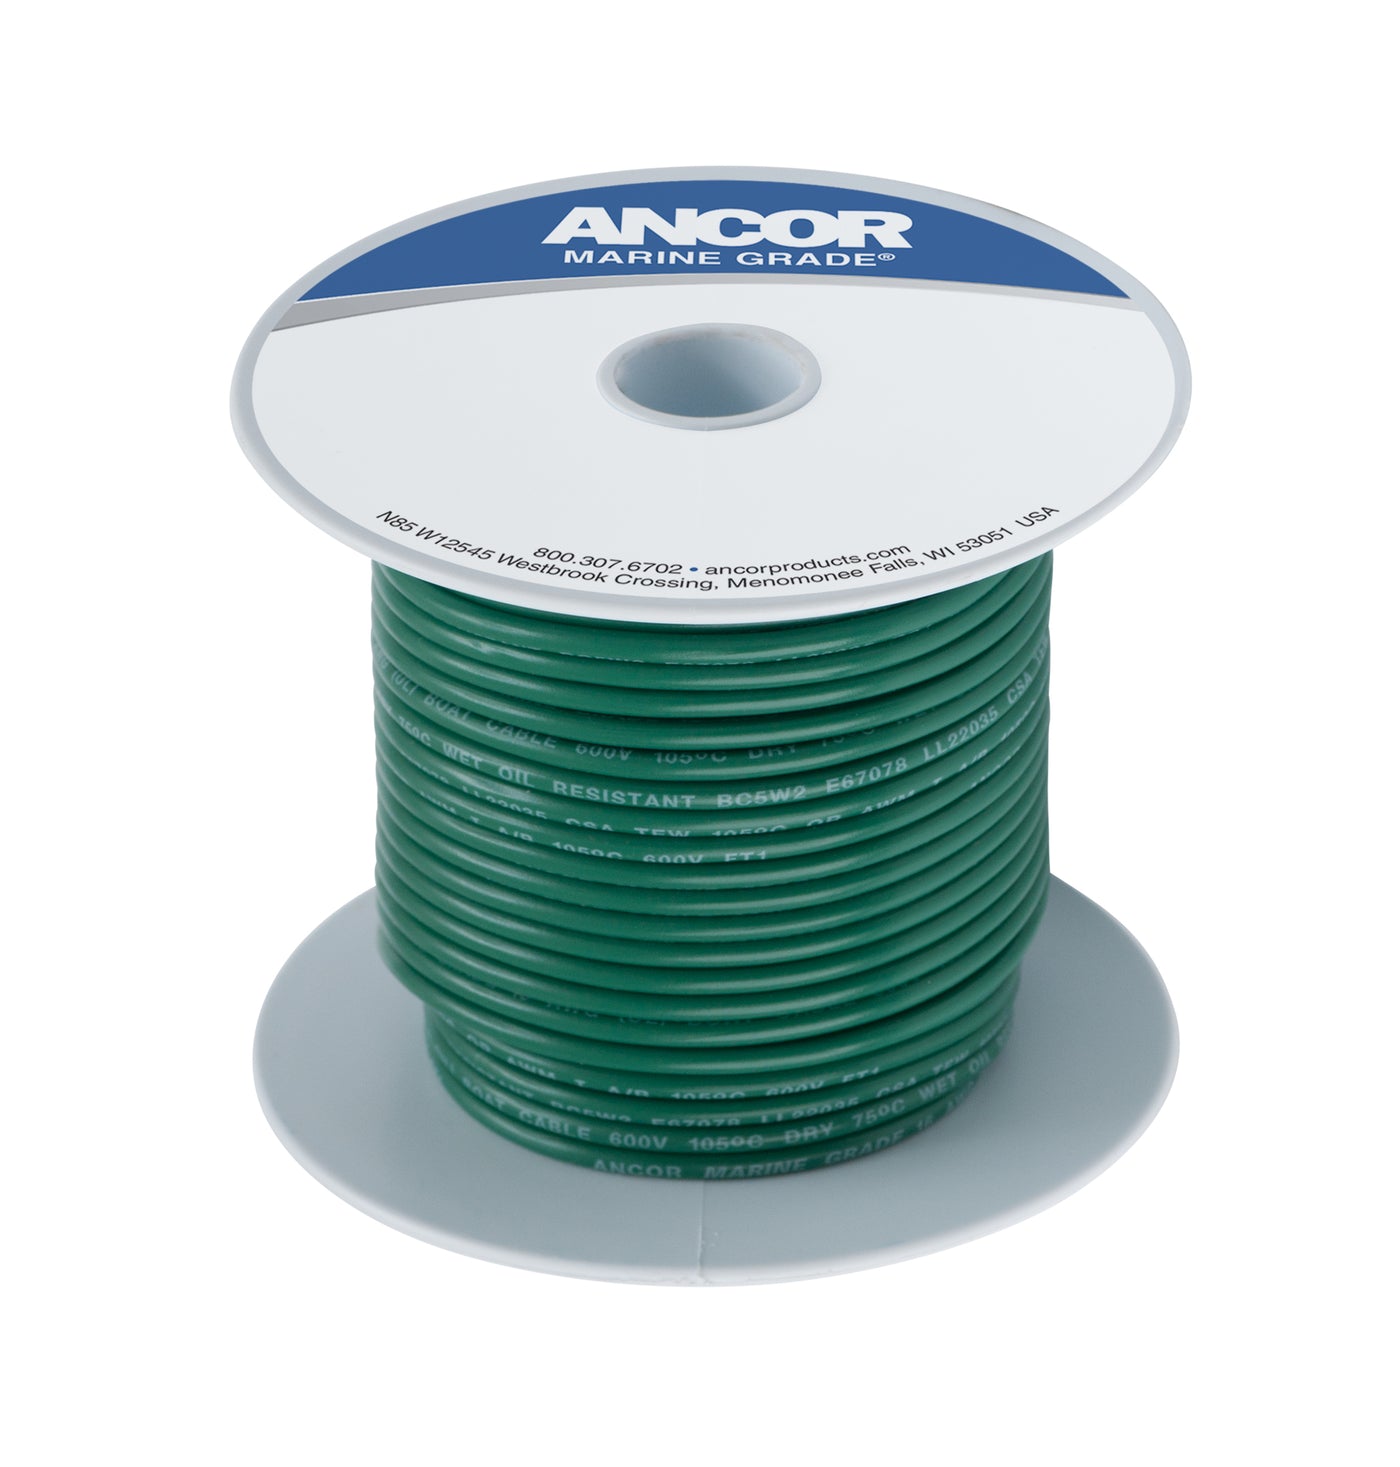 Ancor 111302 Tinned Copper Wire, 8 AWG (8mm²), Green - 25ft